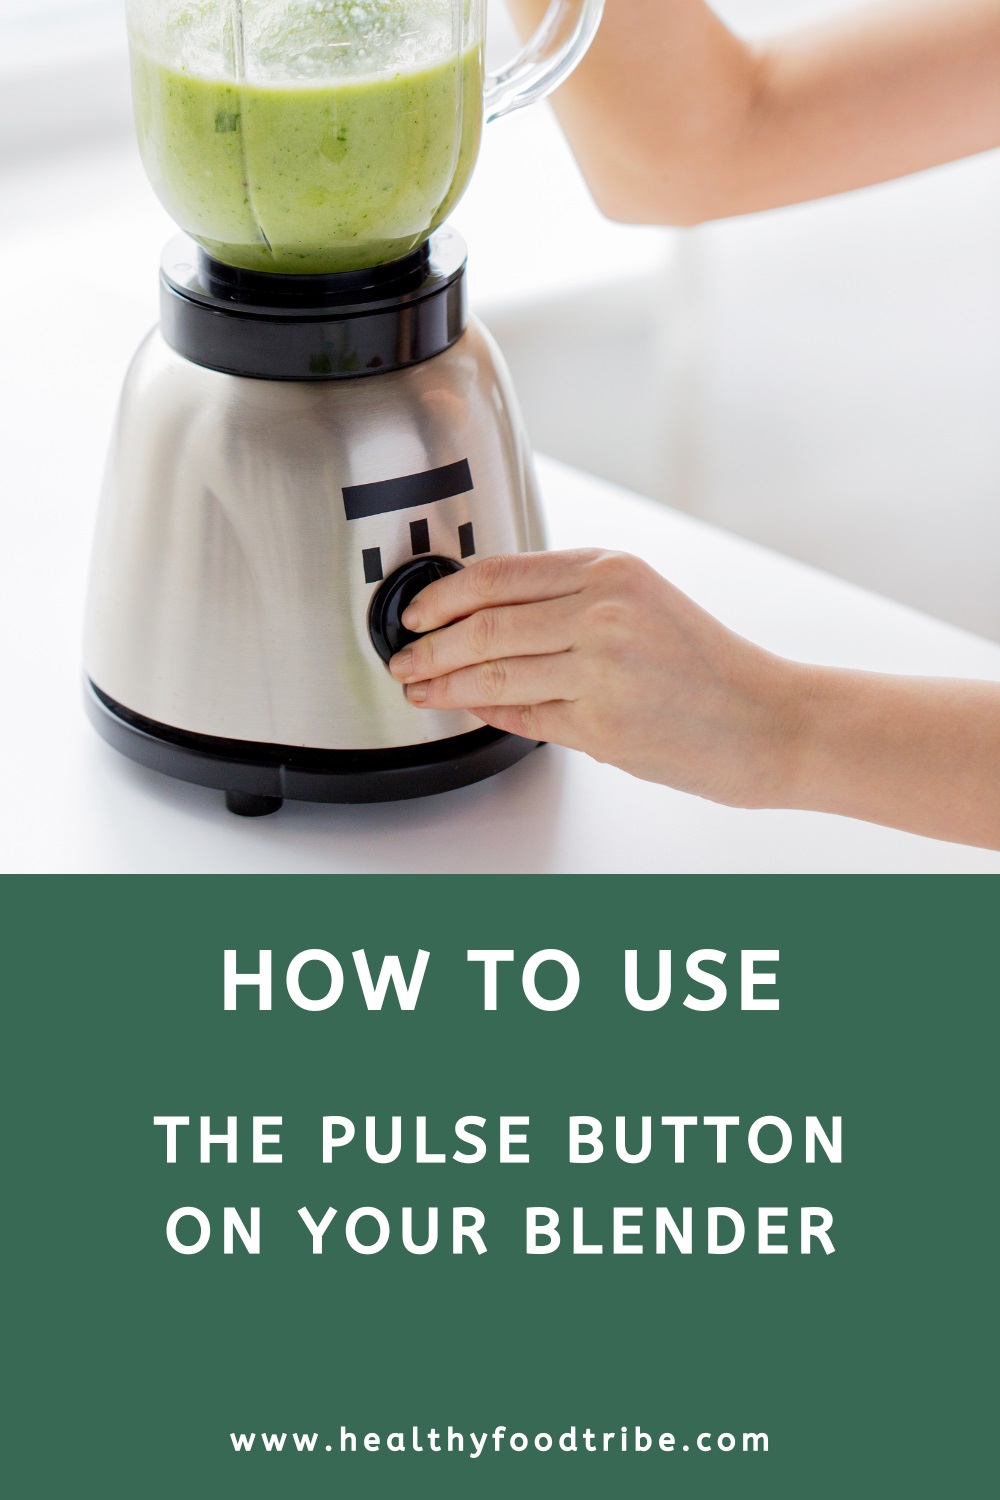 How to use the pulse button on your blender